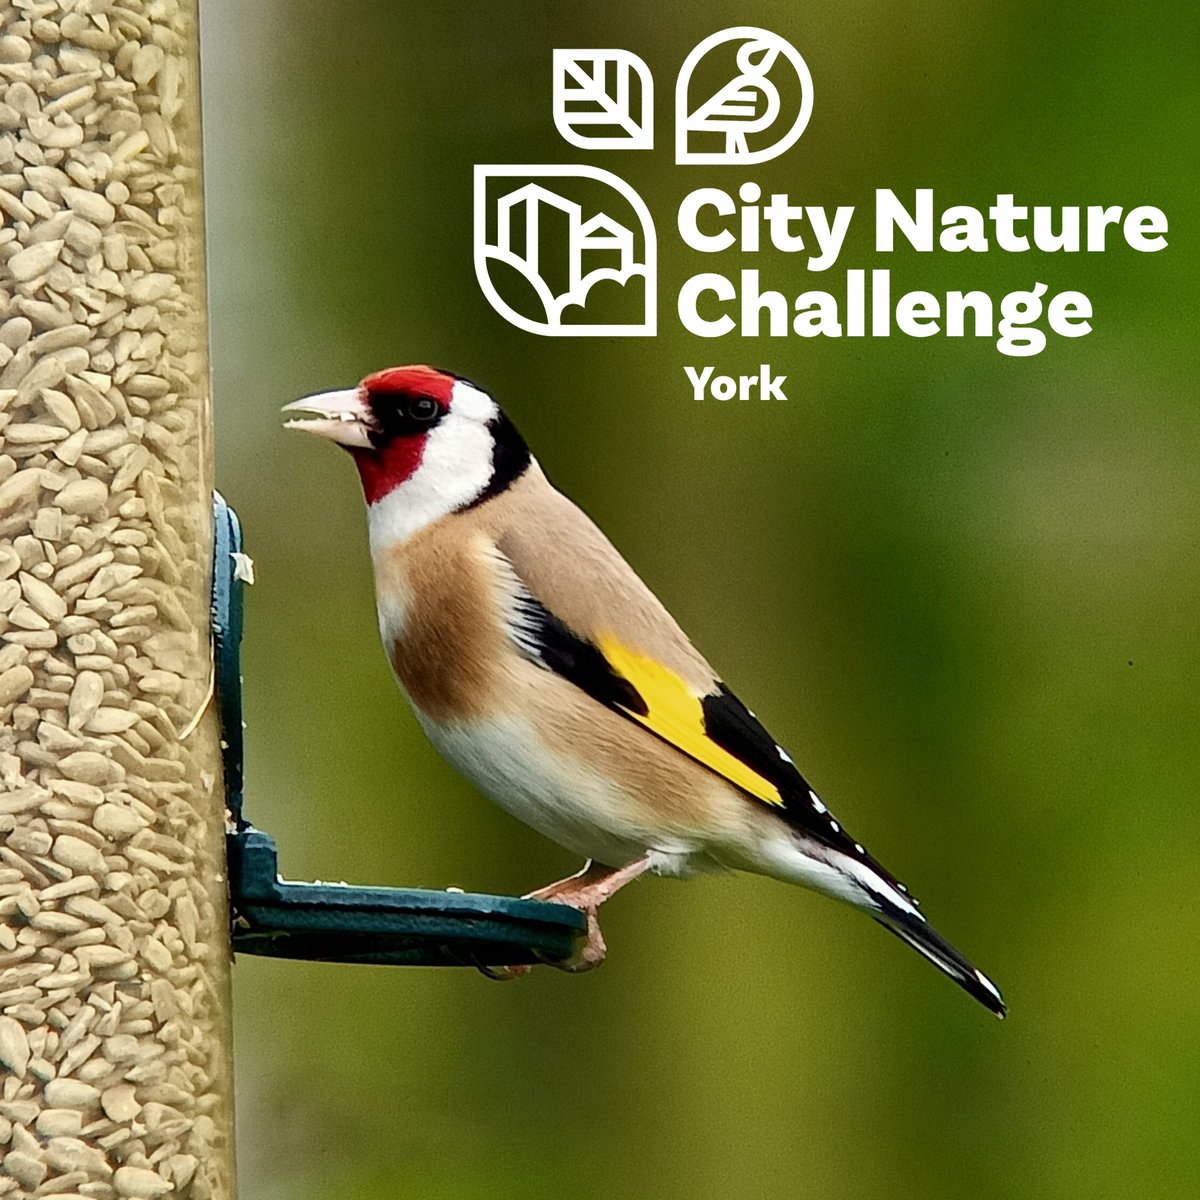 A goldfinch spotted during this year’s #CityNatureChallenge! Don’t forget to help identify any observations so they make it to research grade.

Any photos taken during the challenge can still be uploaded this week as well!

📷 am73whel on iNaturalist